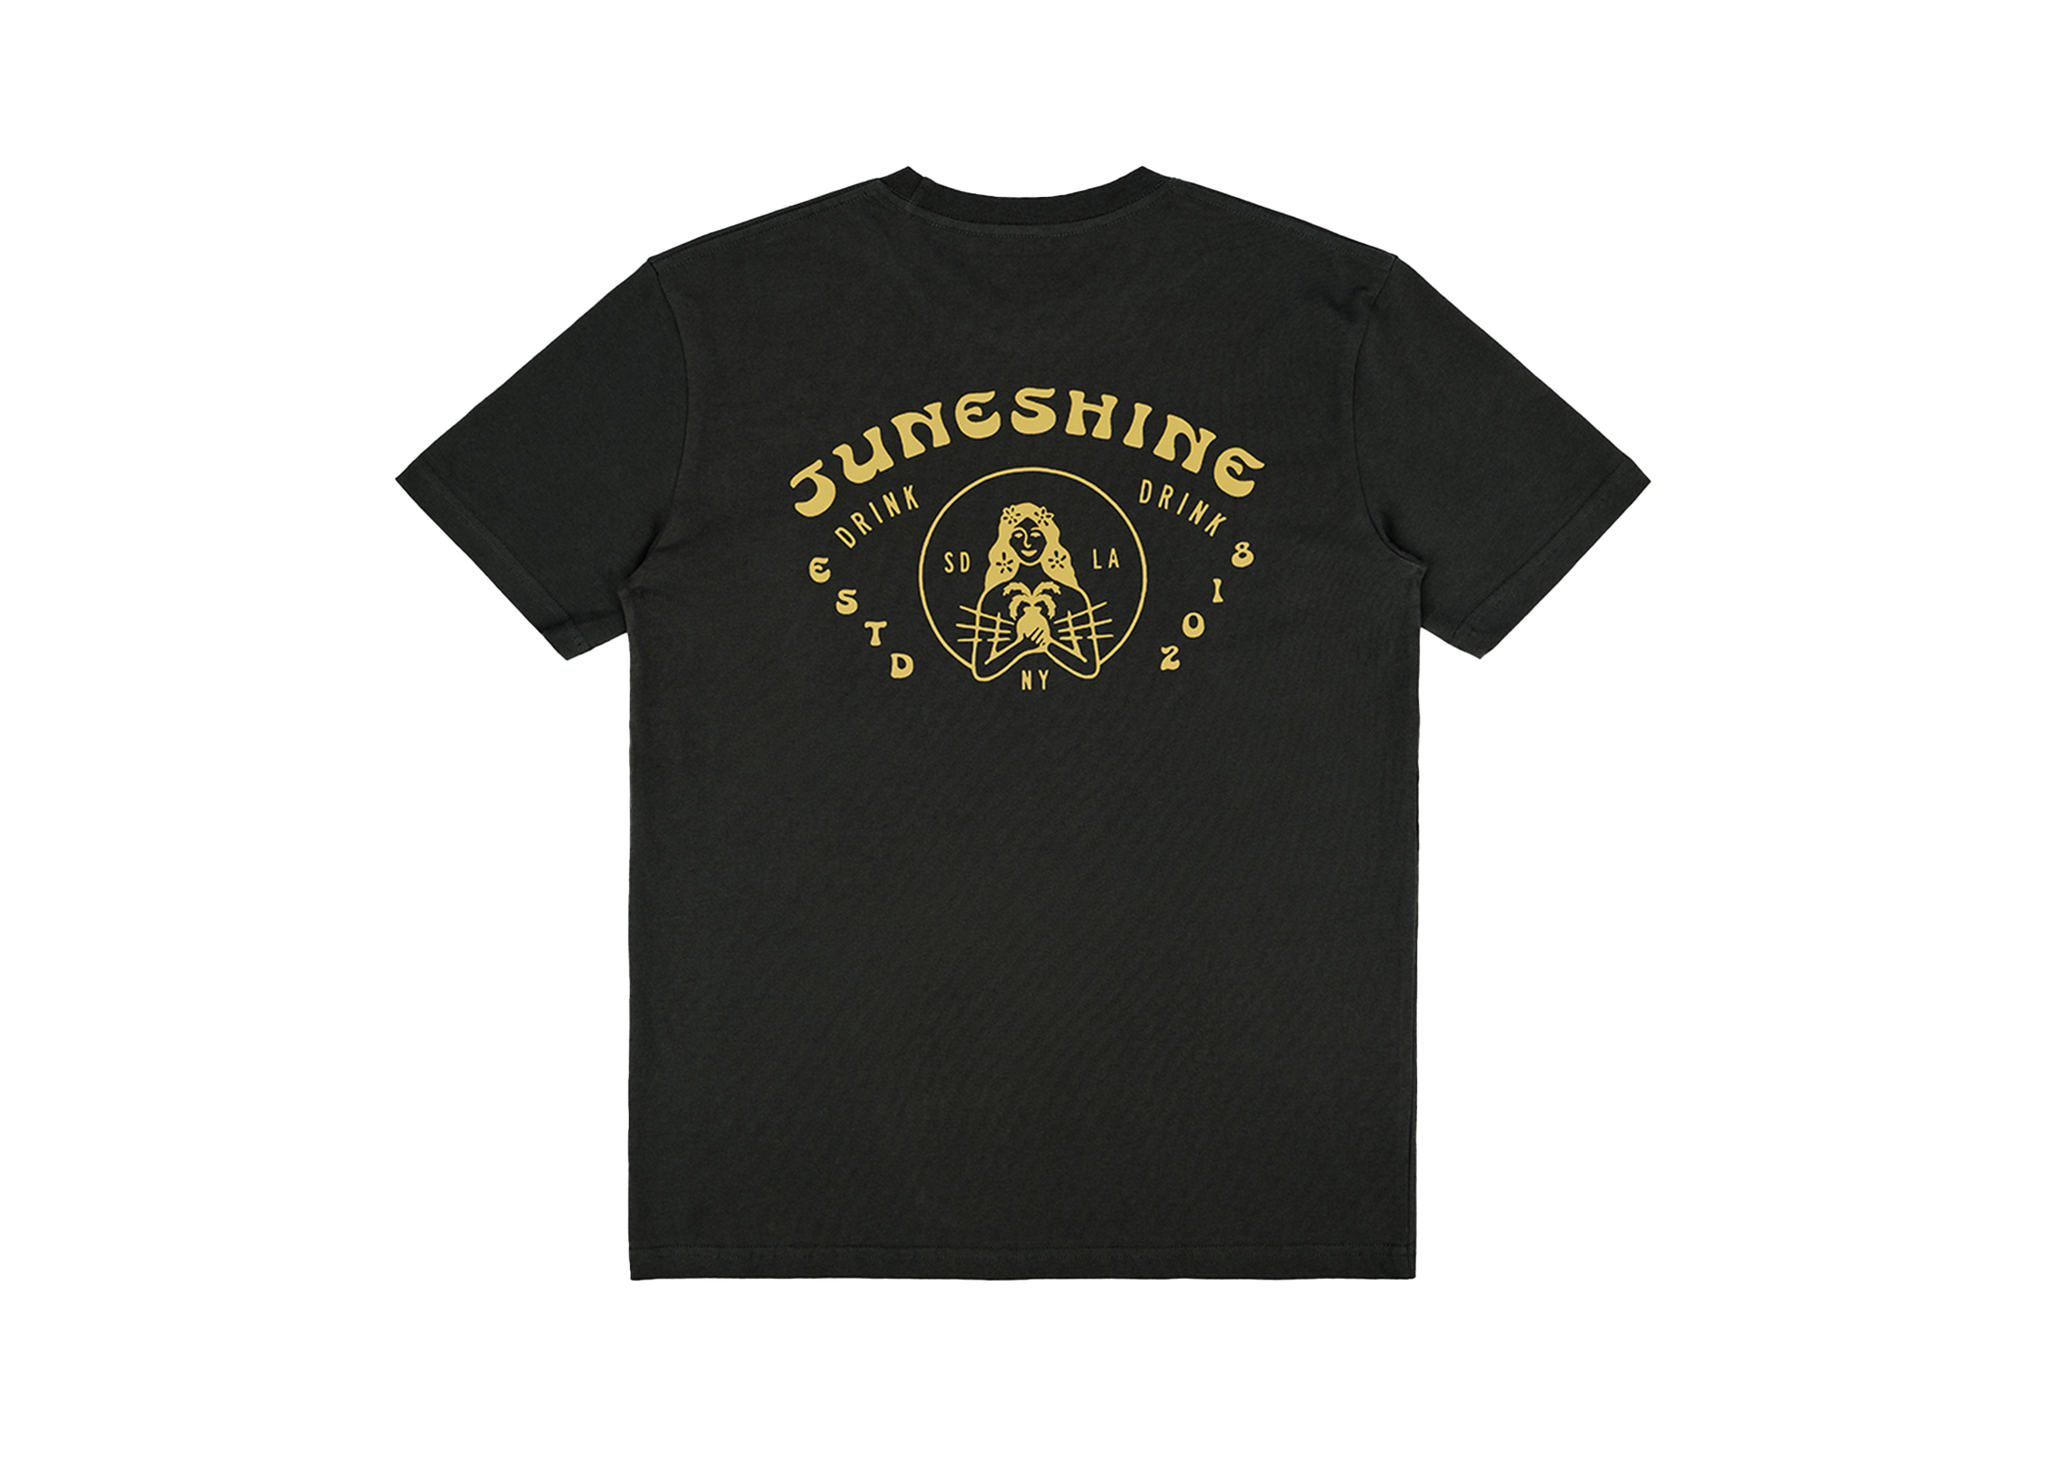 Black JuneShine tshirt that reads JuneShine, Estd 2018 in SD, NY, LA with image of a tropical woman holding a pineapple